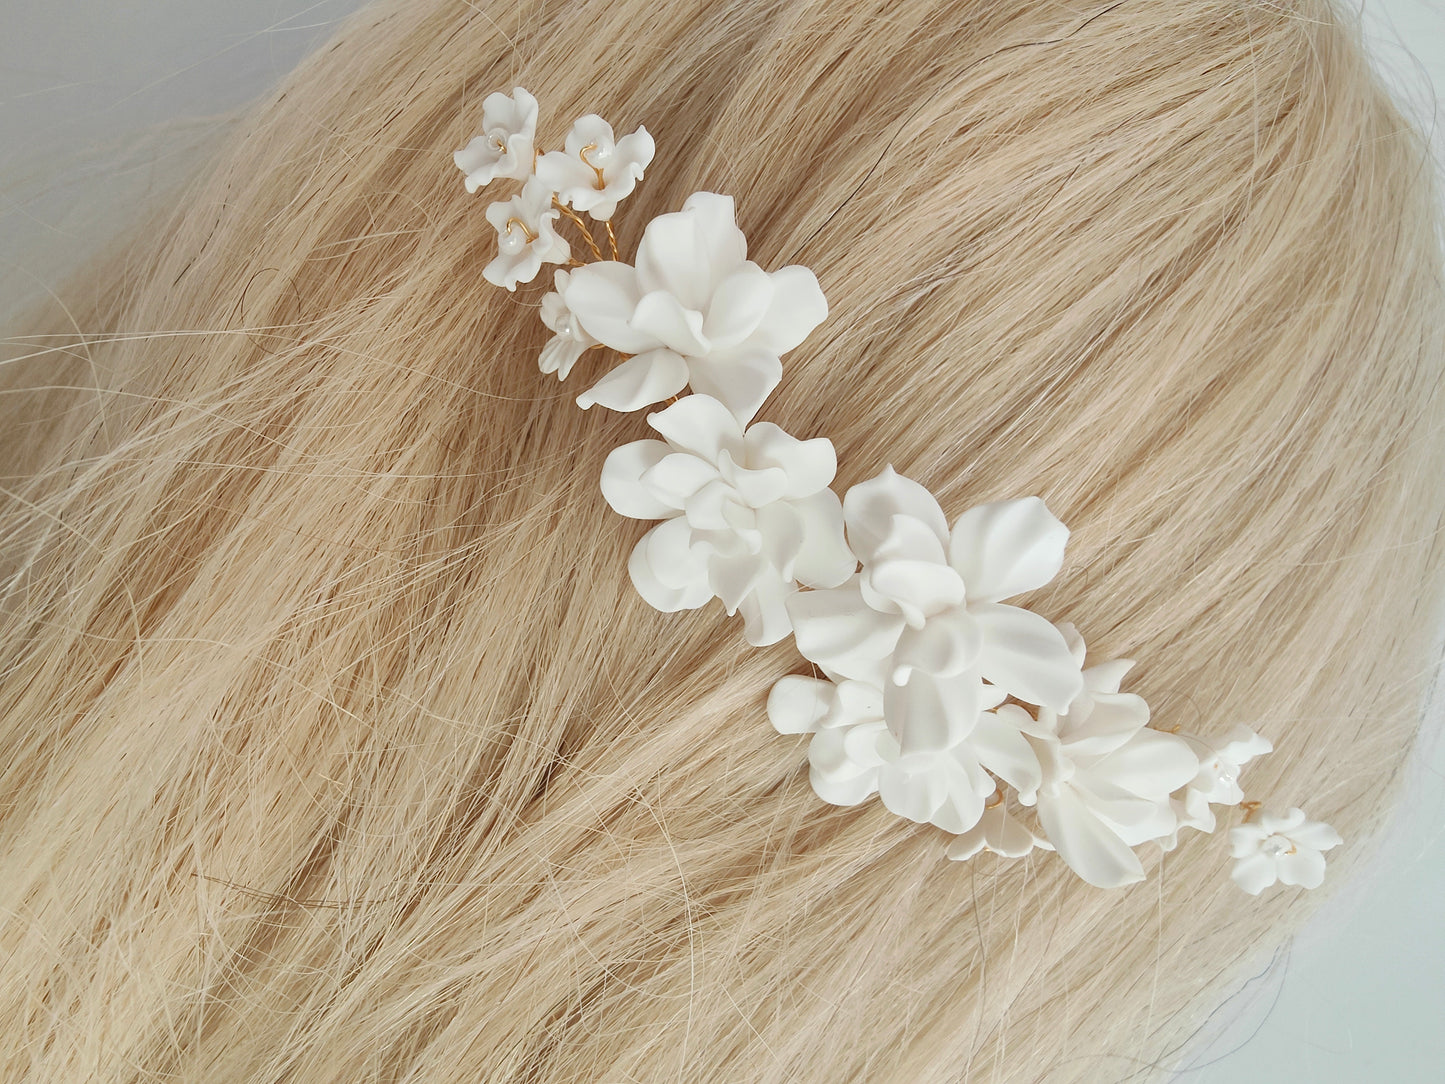 FLORENCE  - Floral Bridal Hair Accessory